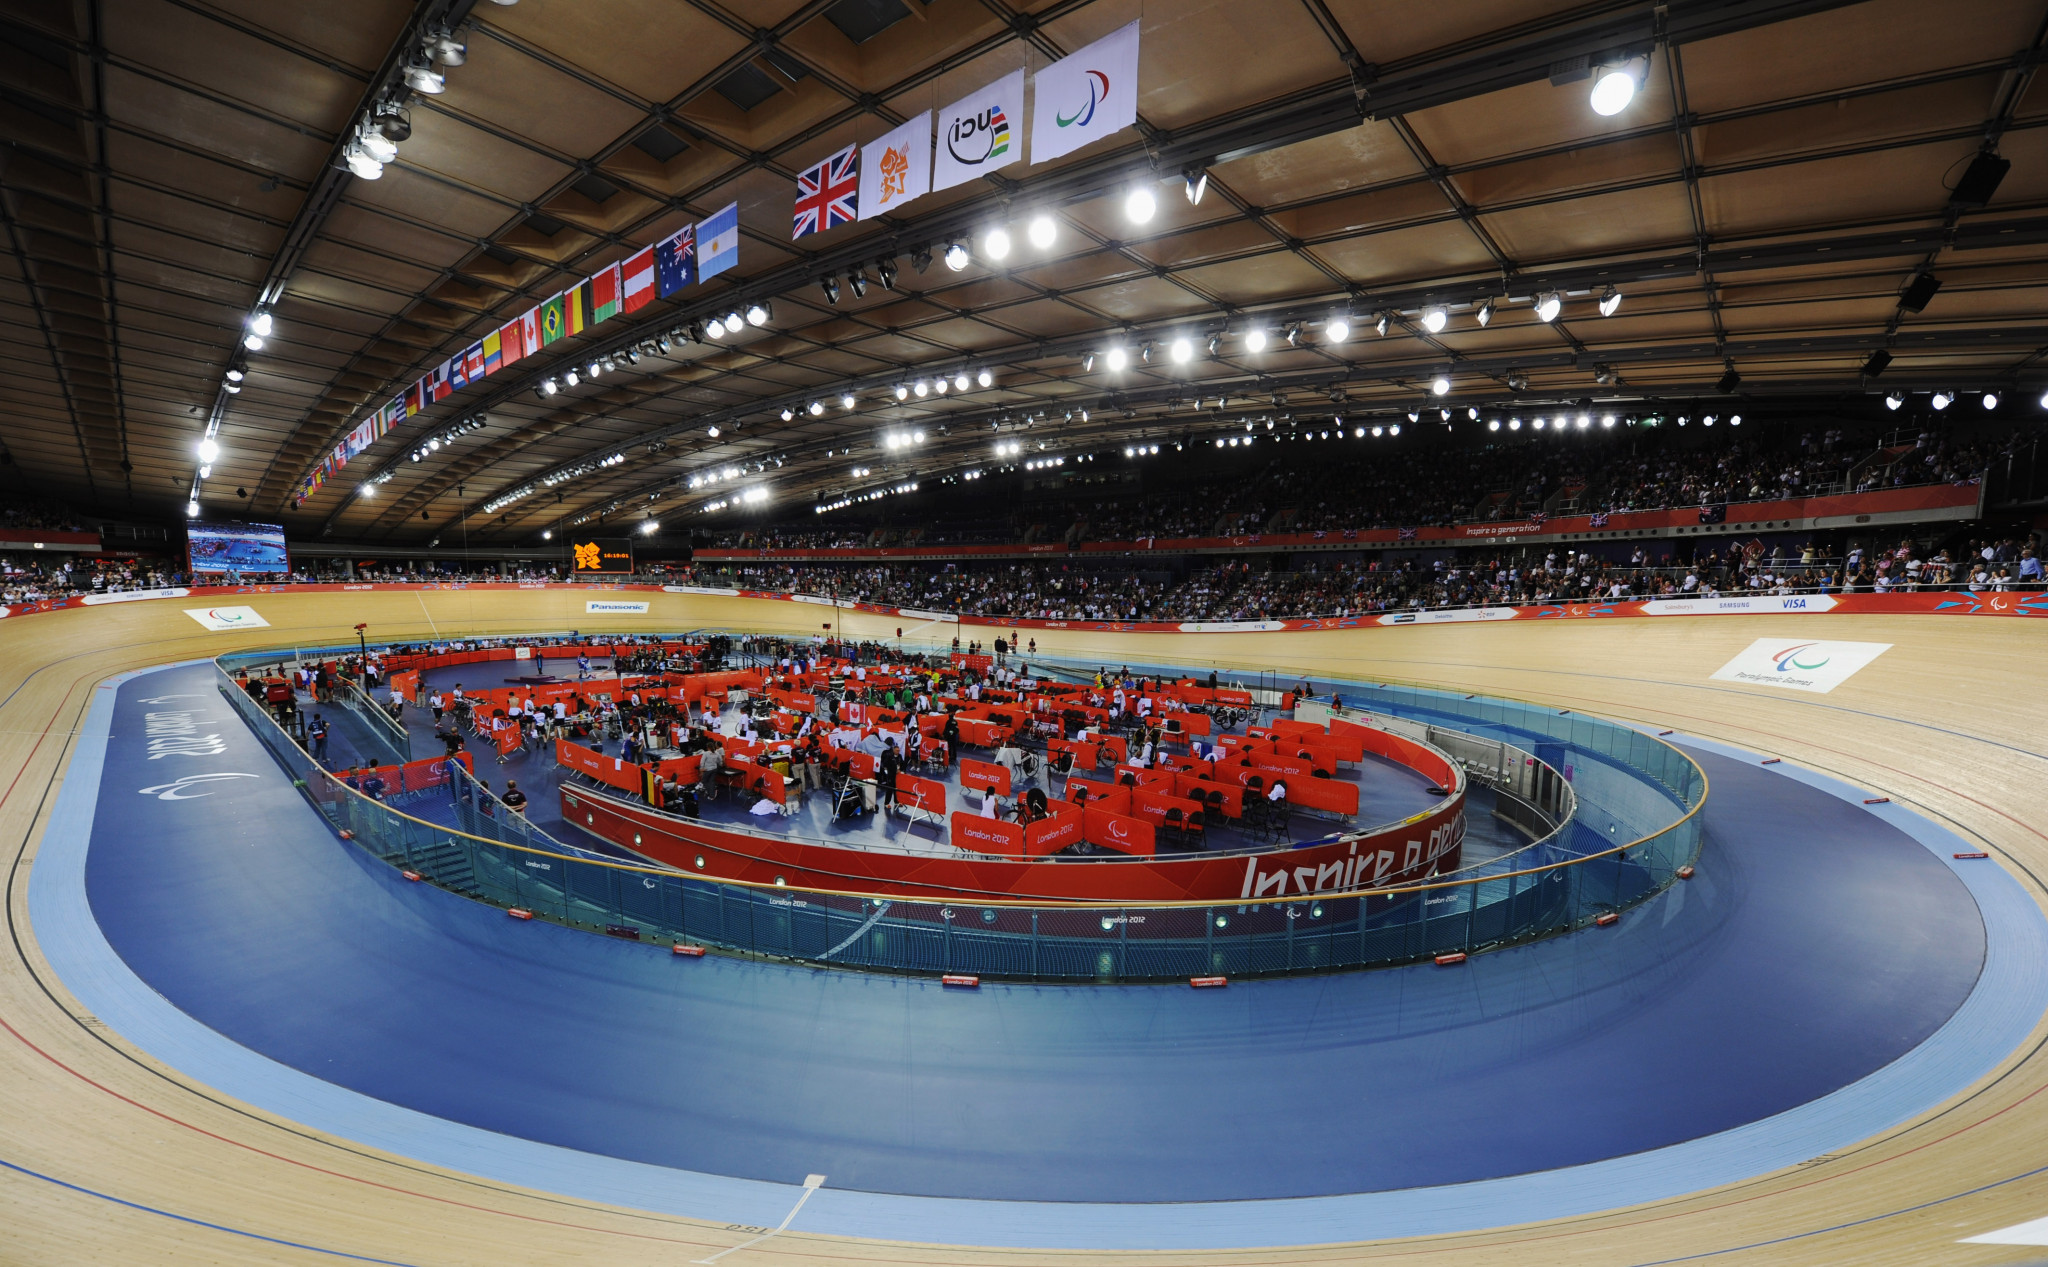 Track cycling will be held outside of Birmingham at the 2022 Commonwealth Games ©ITG